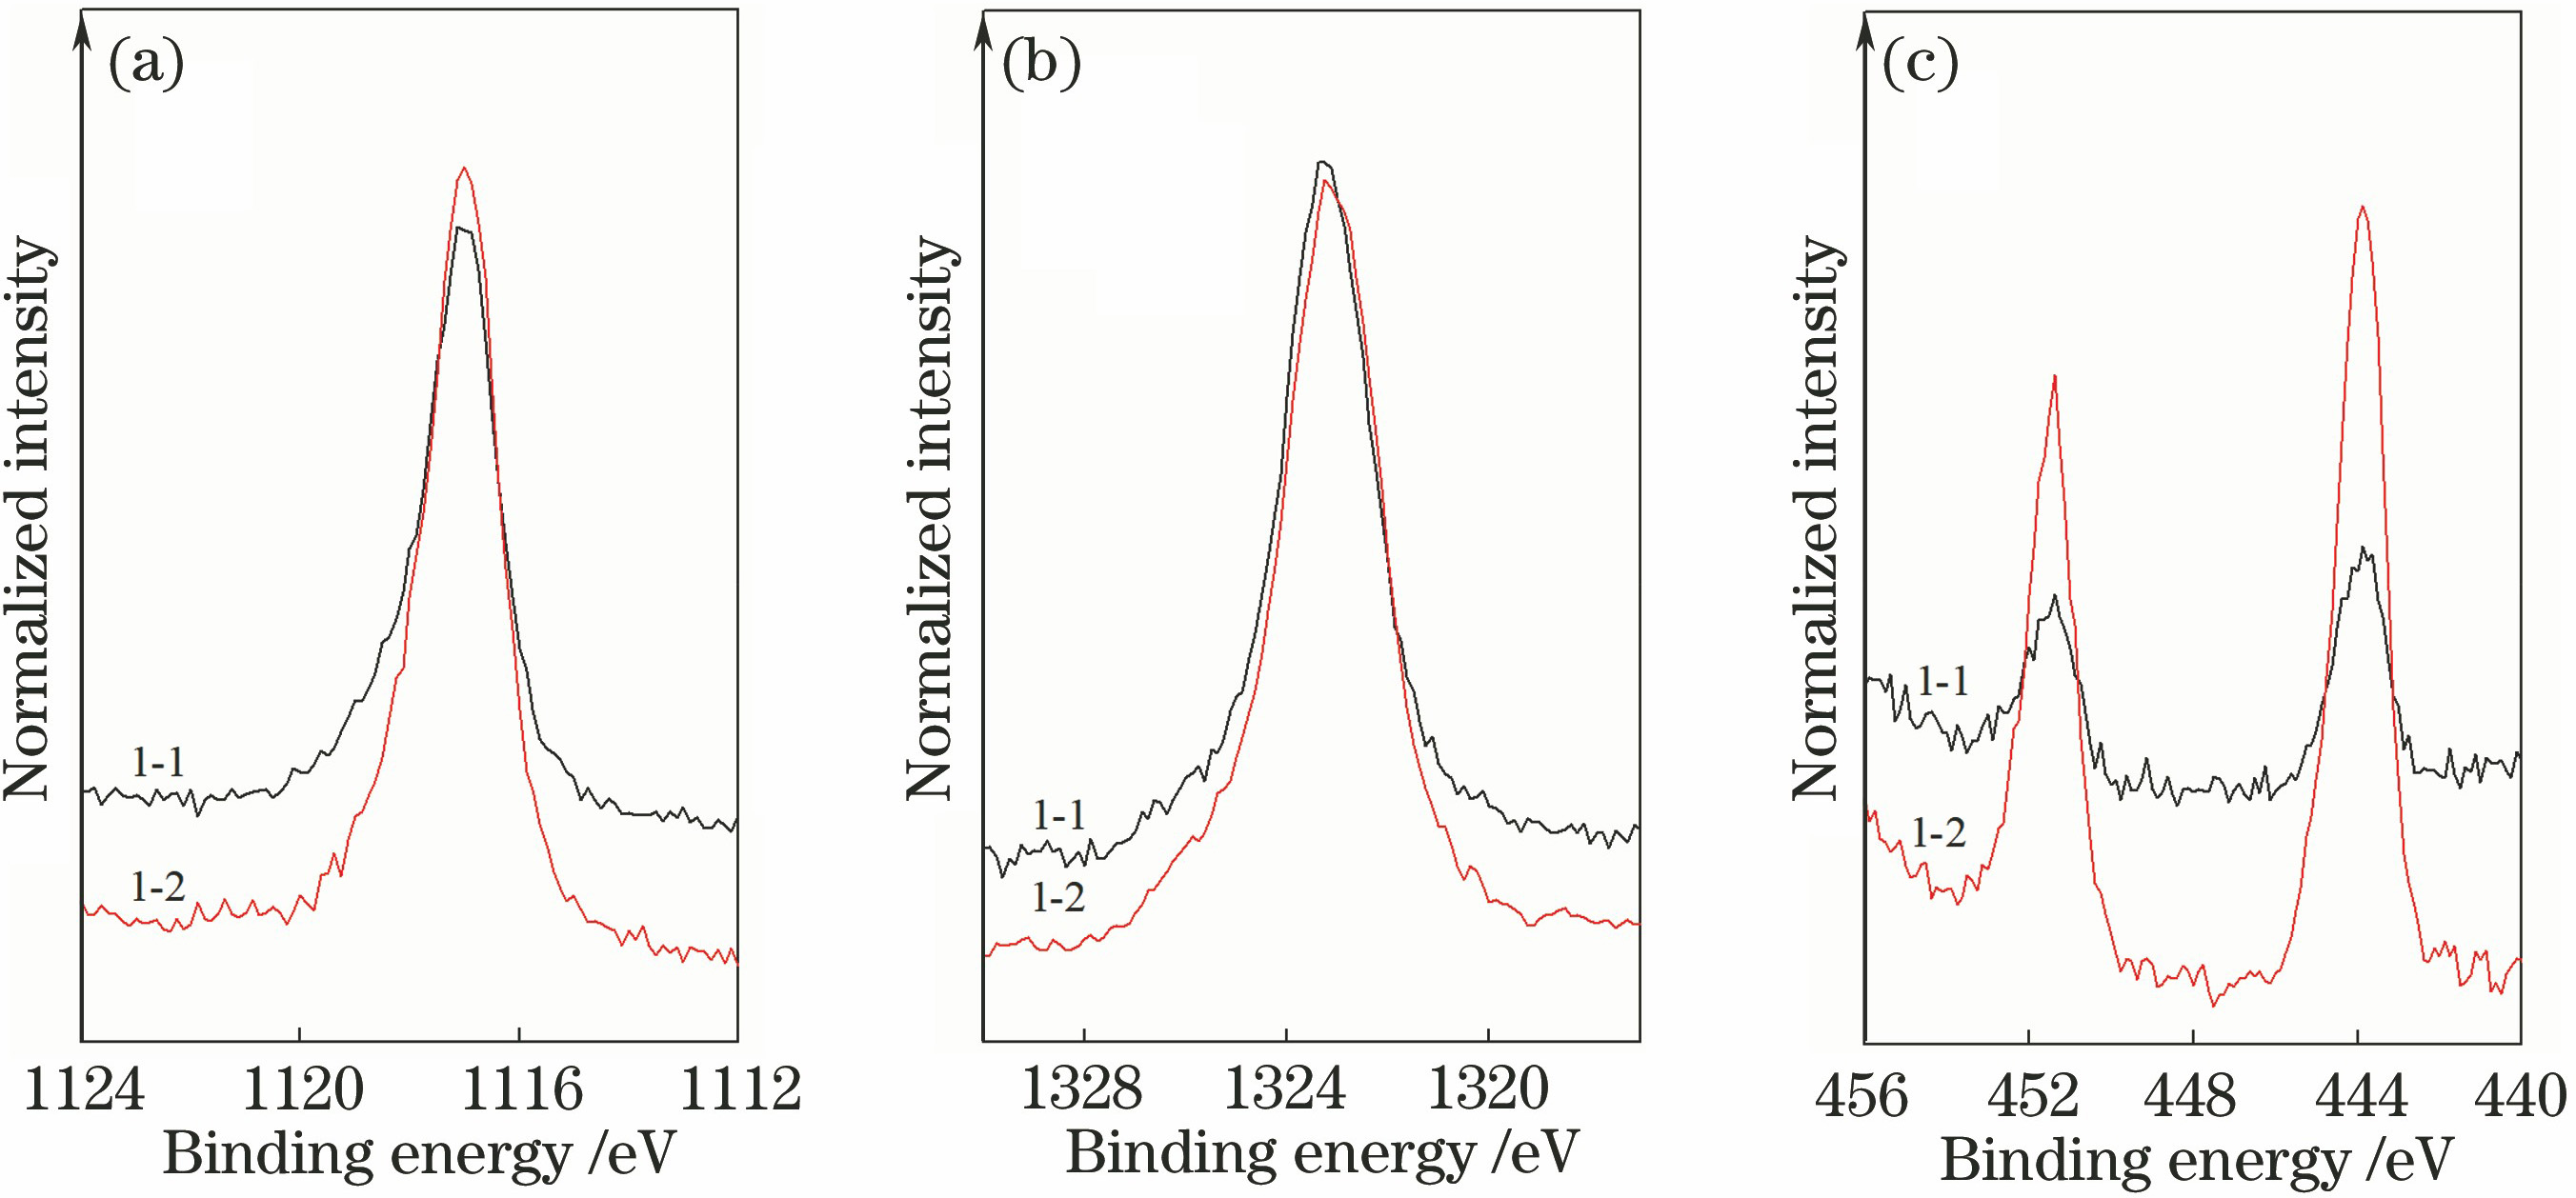 XPS spectra of elements in micro-areas 1-1 and 1-2. (a) Ga2p3; (b) As2p3; (c) In3d